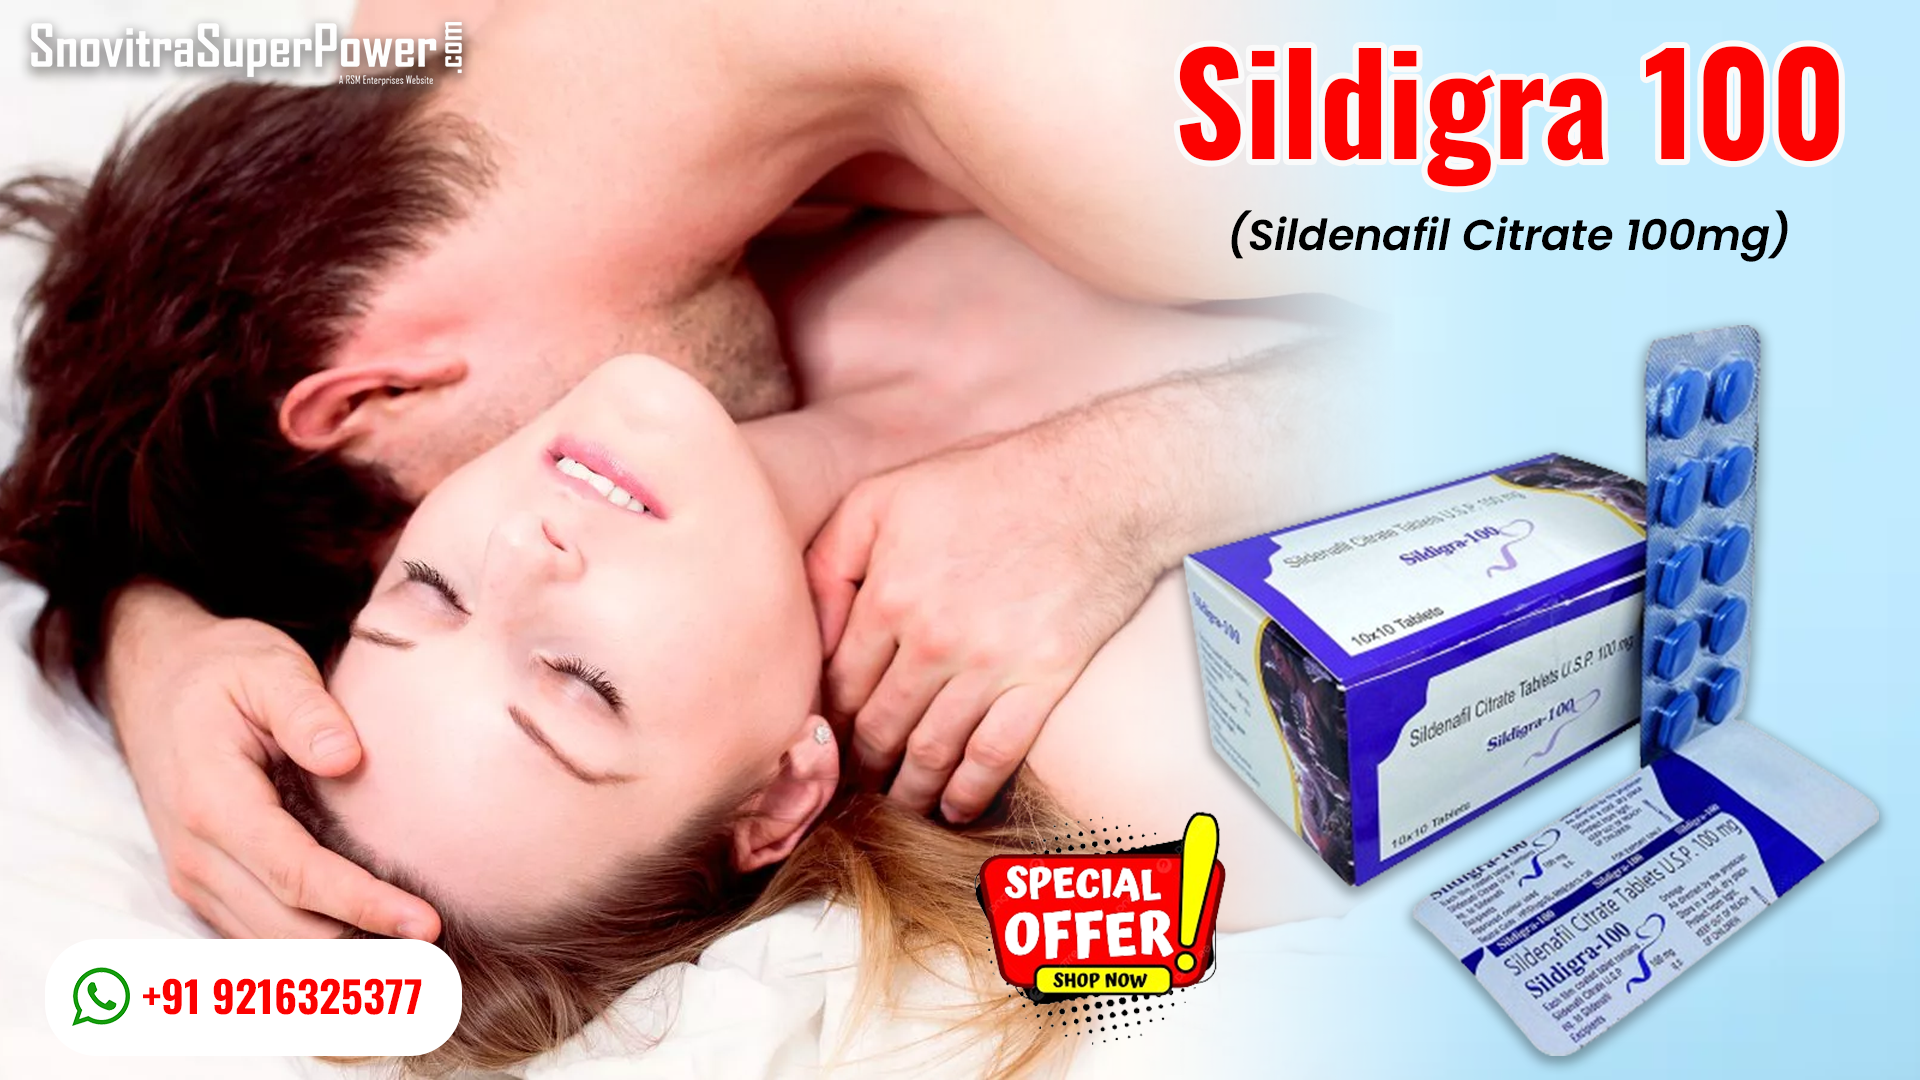 Sildigra 100: An Oral Medication for the Management of Erection Failure